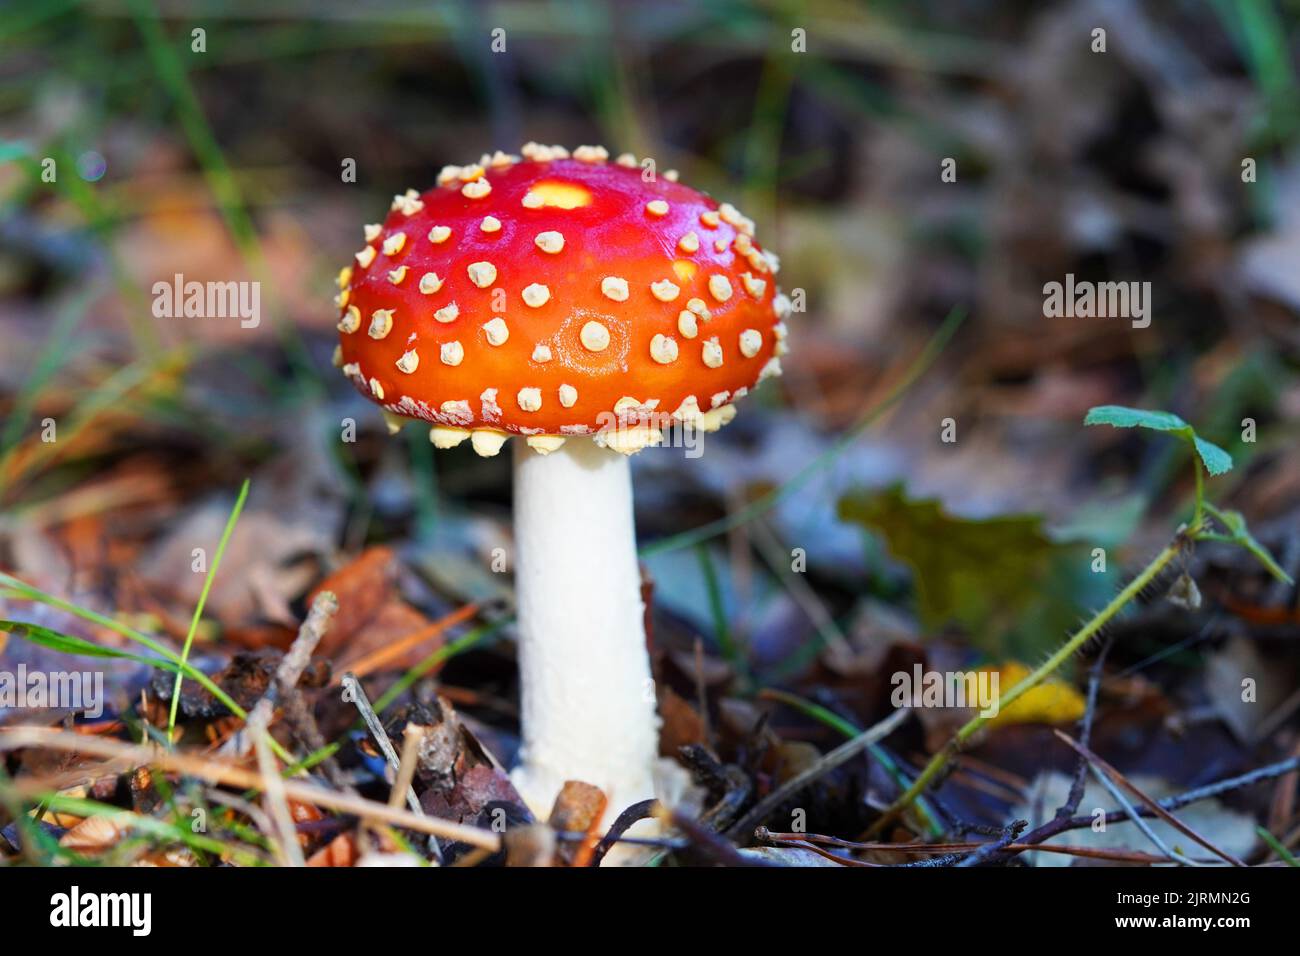 Fresh fly agaric on forest floor. Poisonous red and white spotted mushroom. Inedible. Stock Photo